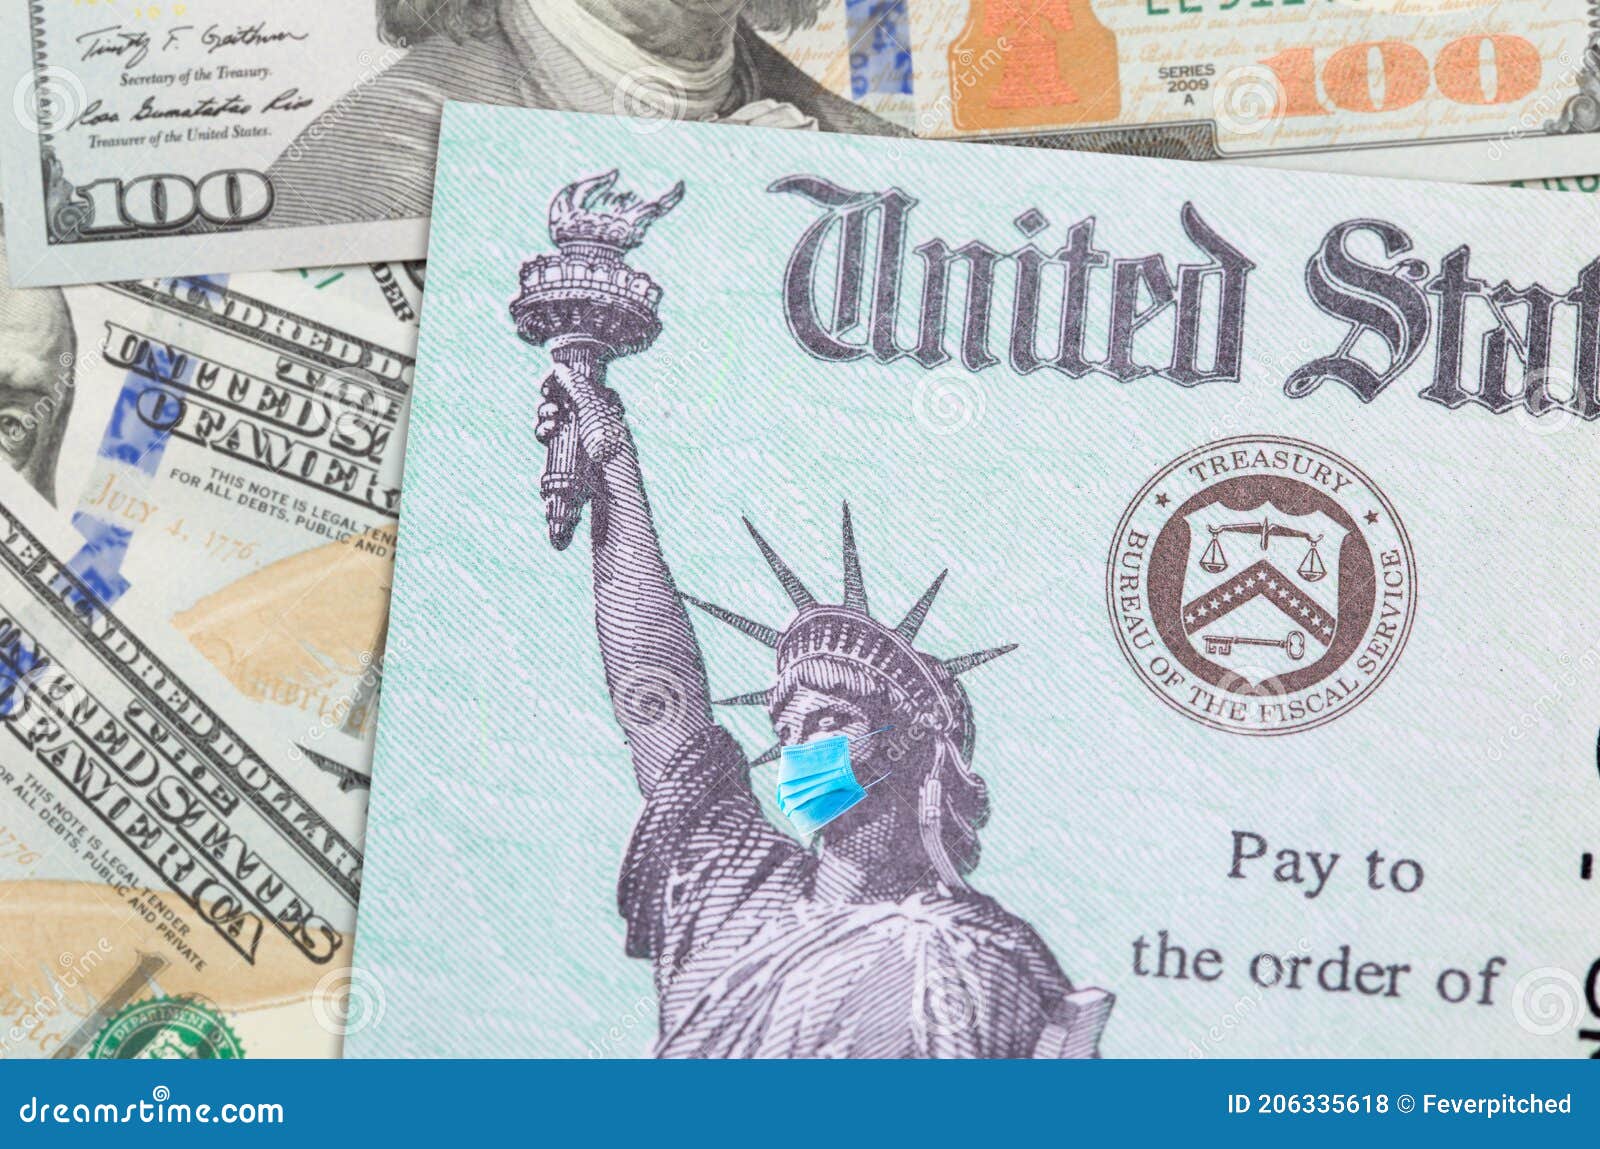 united states irs stimulus check with statue of liberty wearing medical face mask resting on money